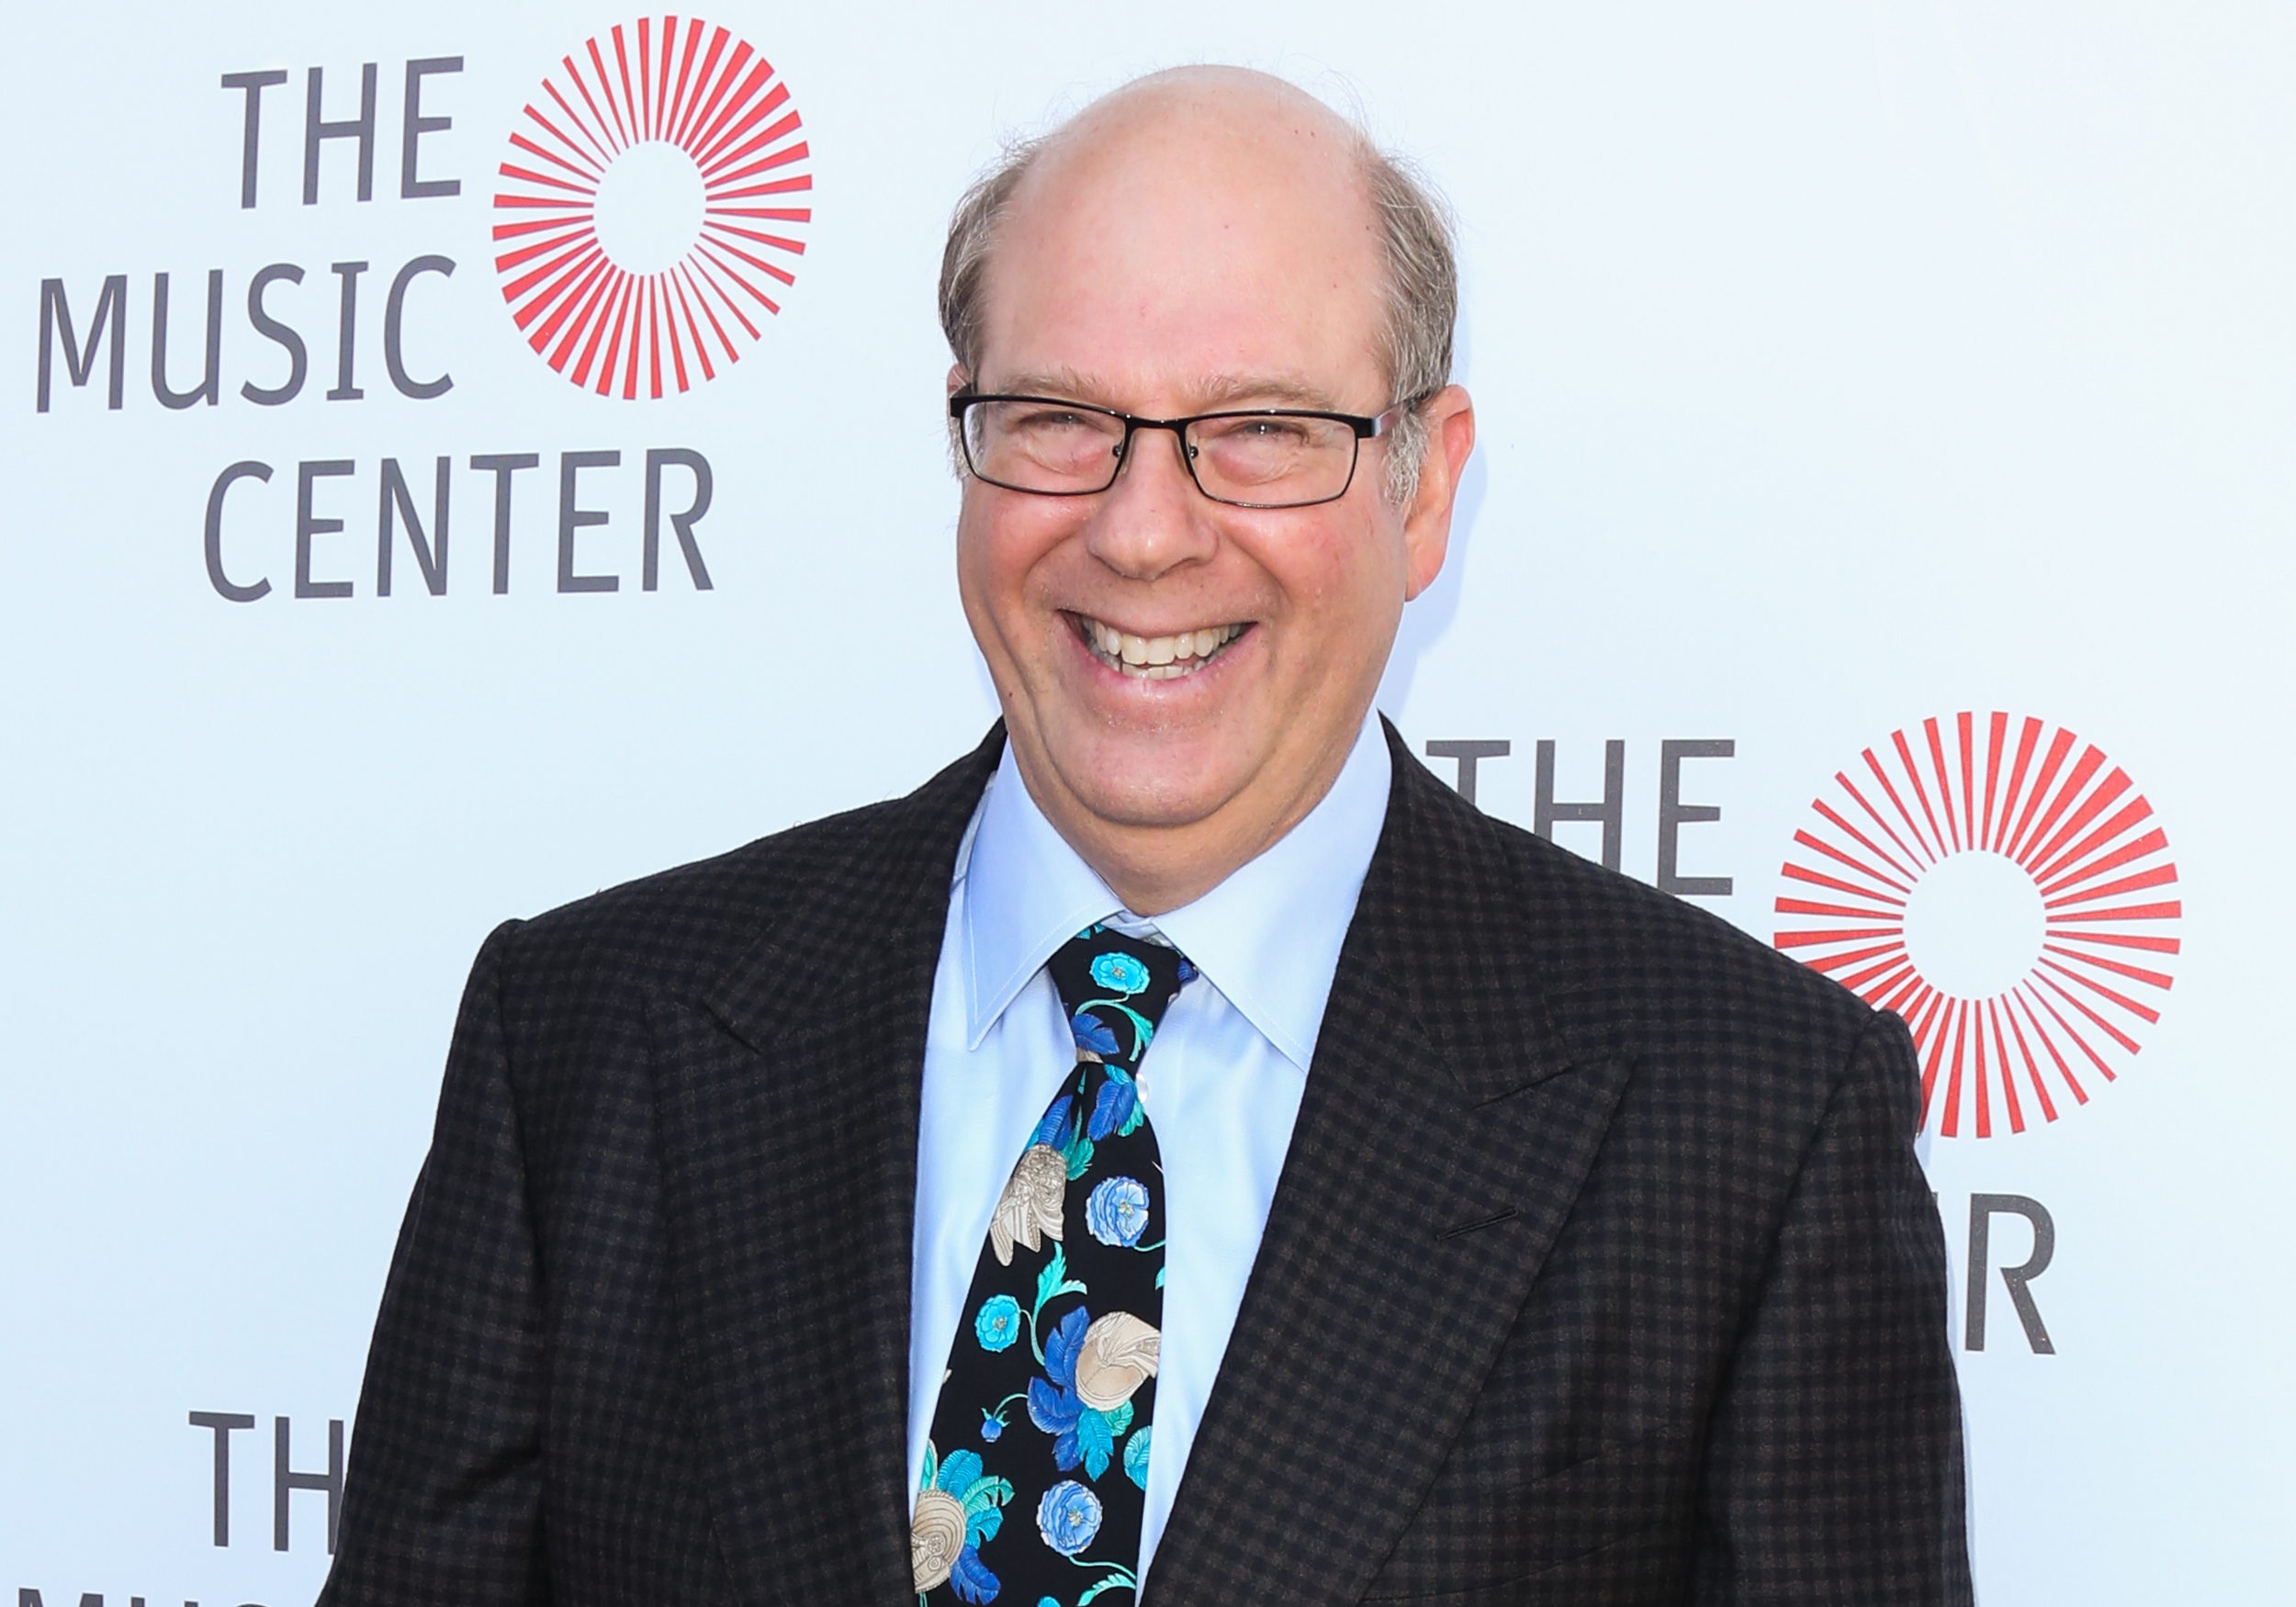 <p>Tobolowsky is one of those character actors who seems to pop up in everything. Most memorably, he played Ned Ryerson in “Groundhog Day,” but he also made a noteworthy turn as an alternative doctor in an early “Seinfeld” episode. George goes to see Tobolowsky’s “Tor,” and ends up getting turned purple by his “medicine.”</p>